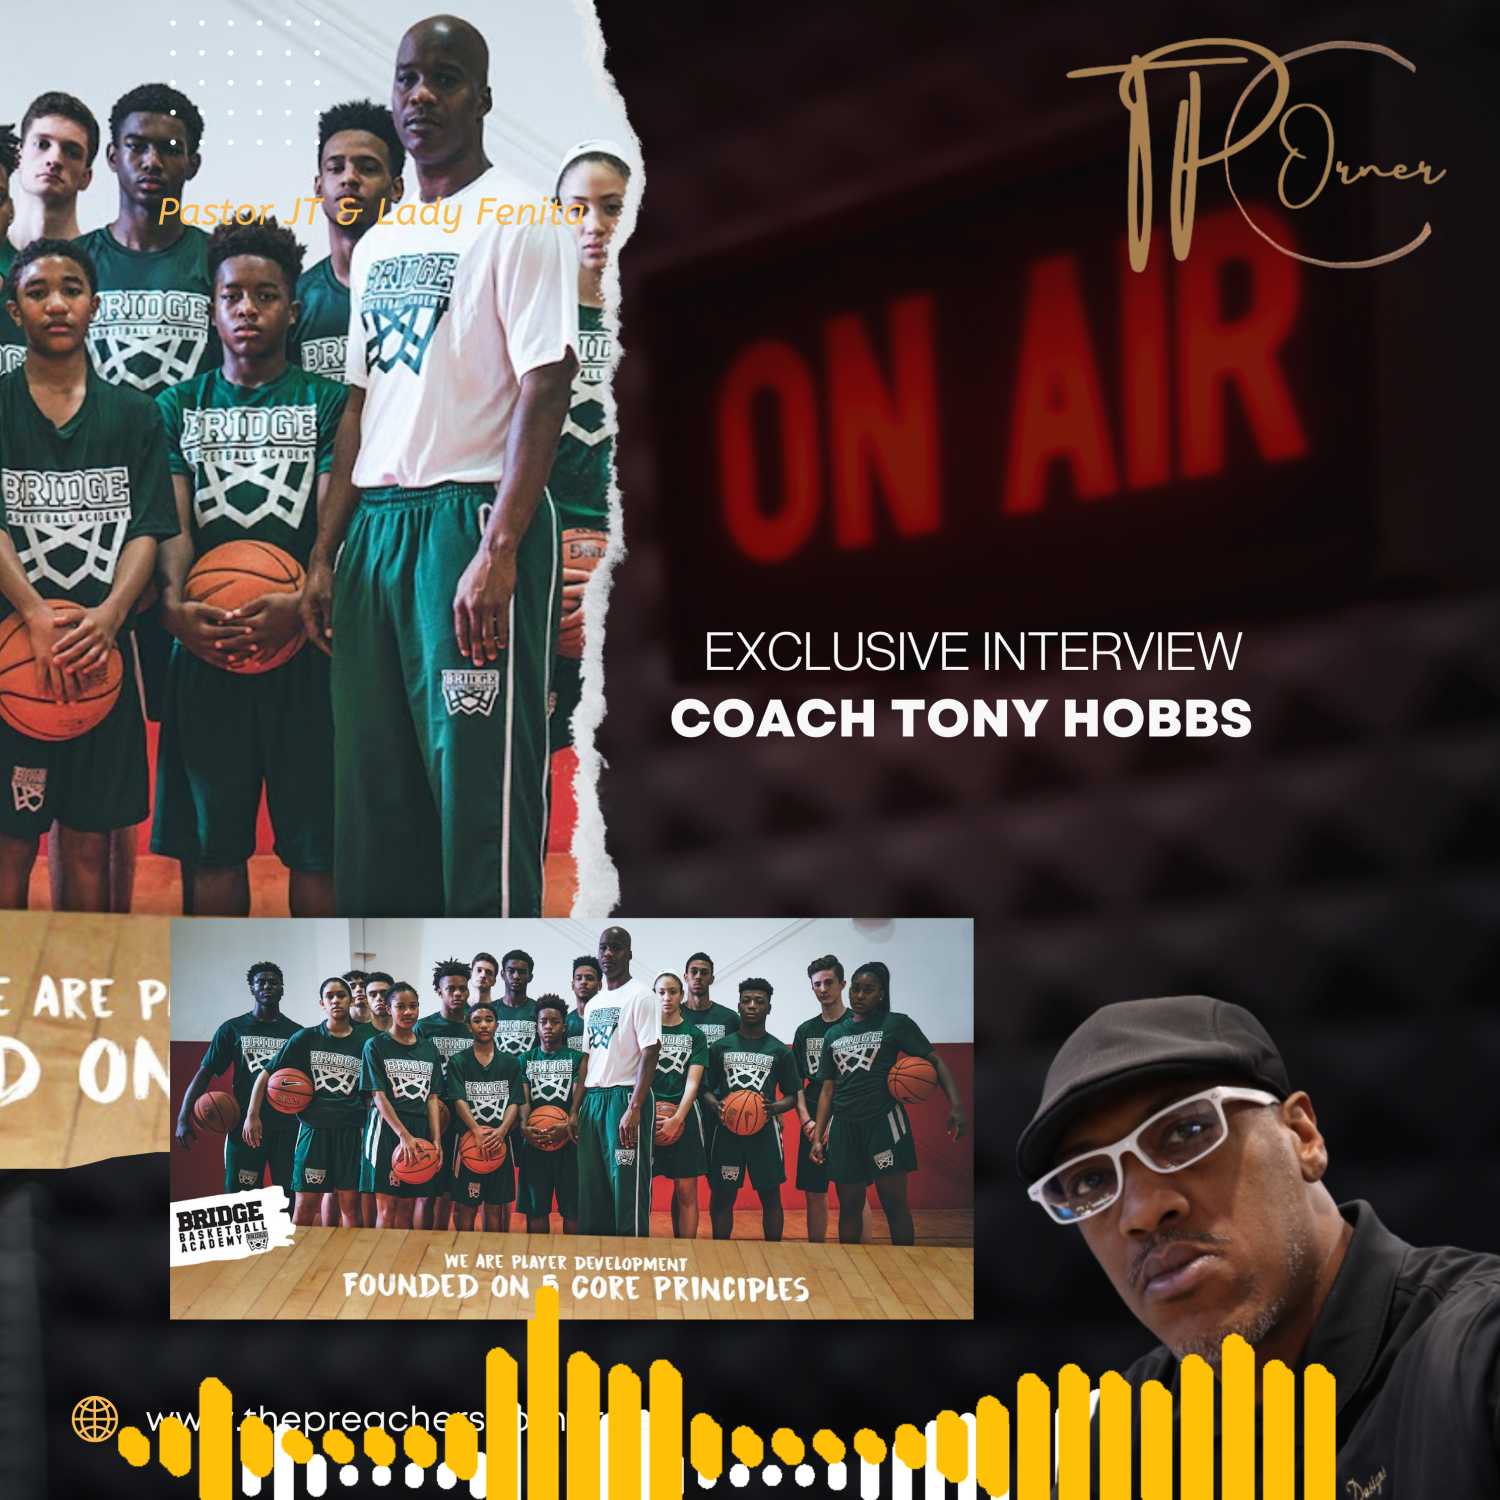 EXCLUSIVE INTERVIEW WITH COACH TONY HOBBS SE2 EP 49